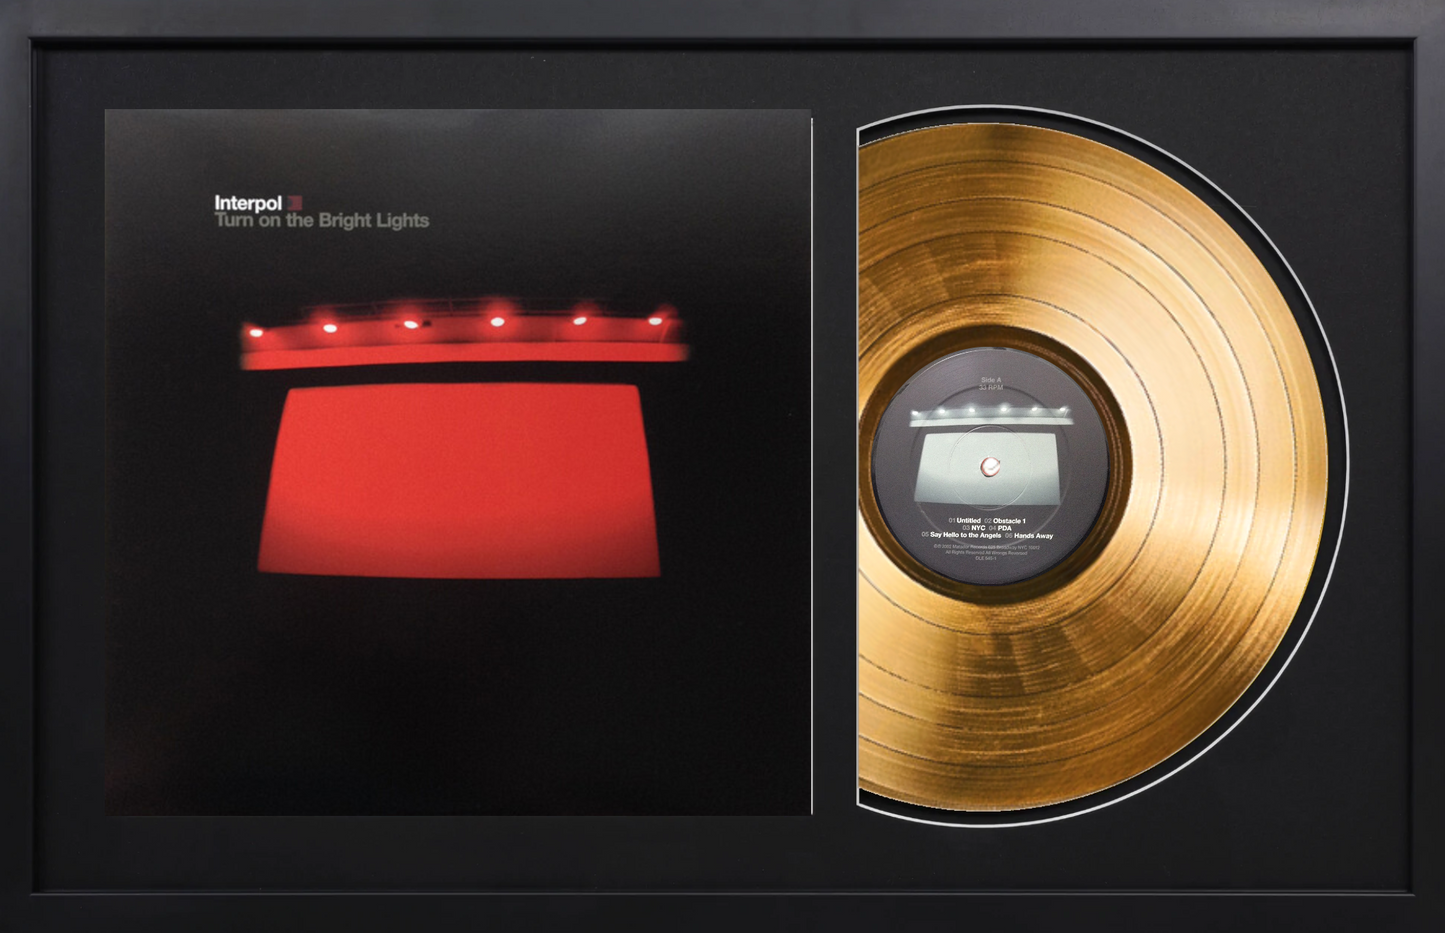 Interpol - Turn on the Bright Lights - Limited Edition - 14K Gold Album